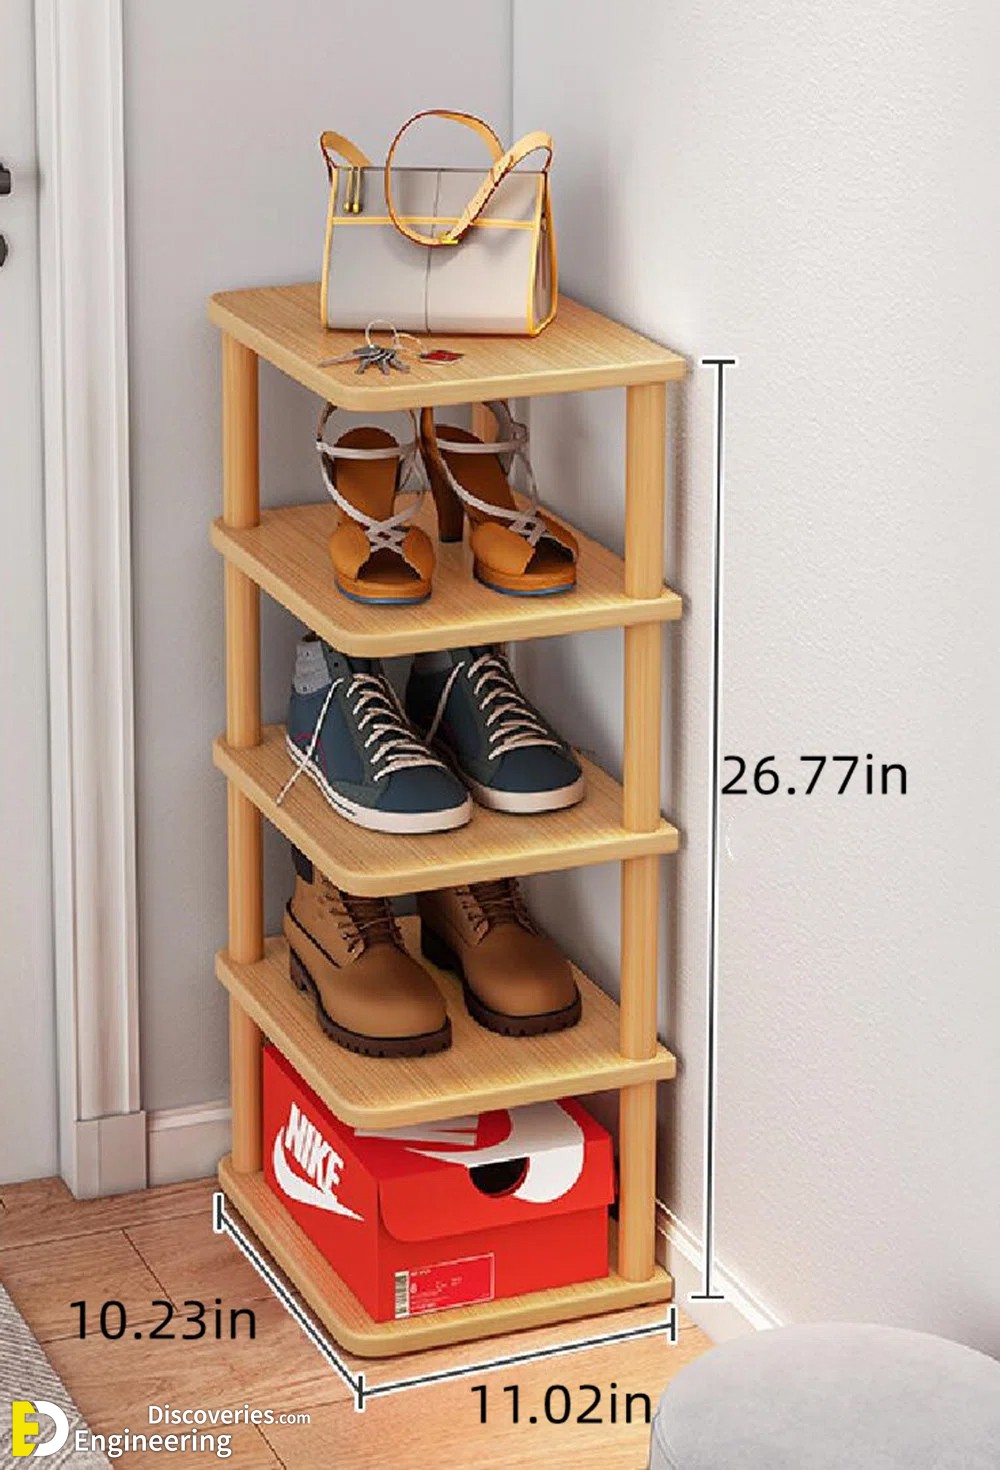 https://engineeringdiscoveries.com/9-engineering-discoveries-27-space-saving-modern-shoe-rack-cabinet-designs-for-small-homes/